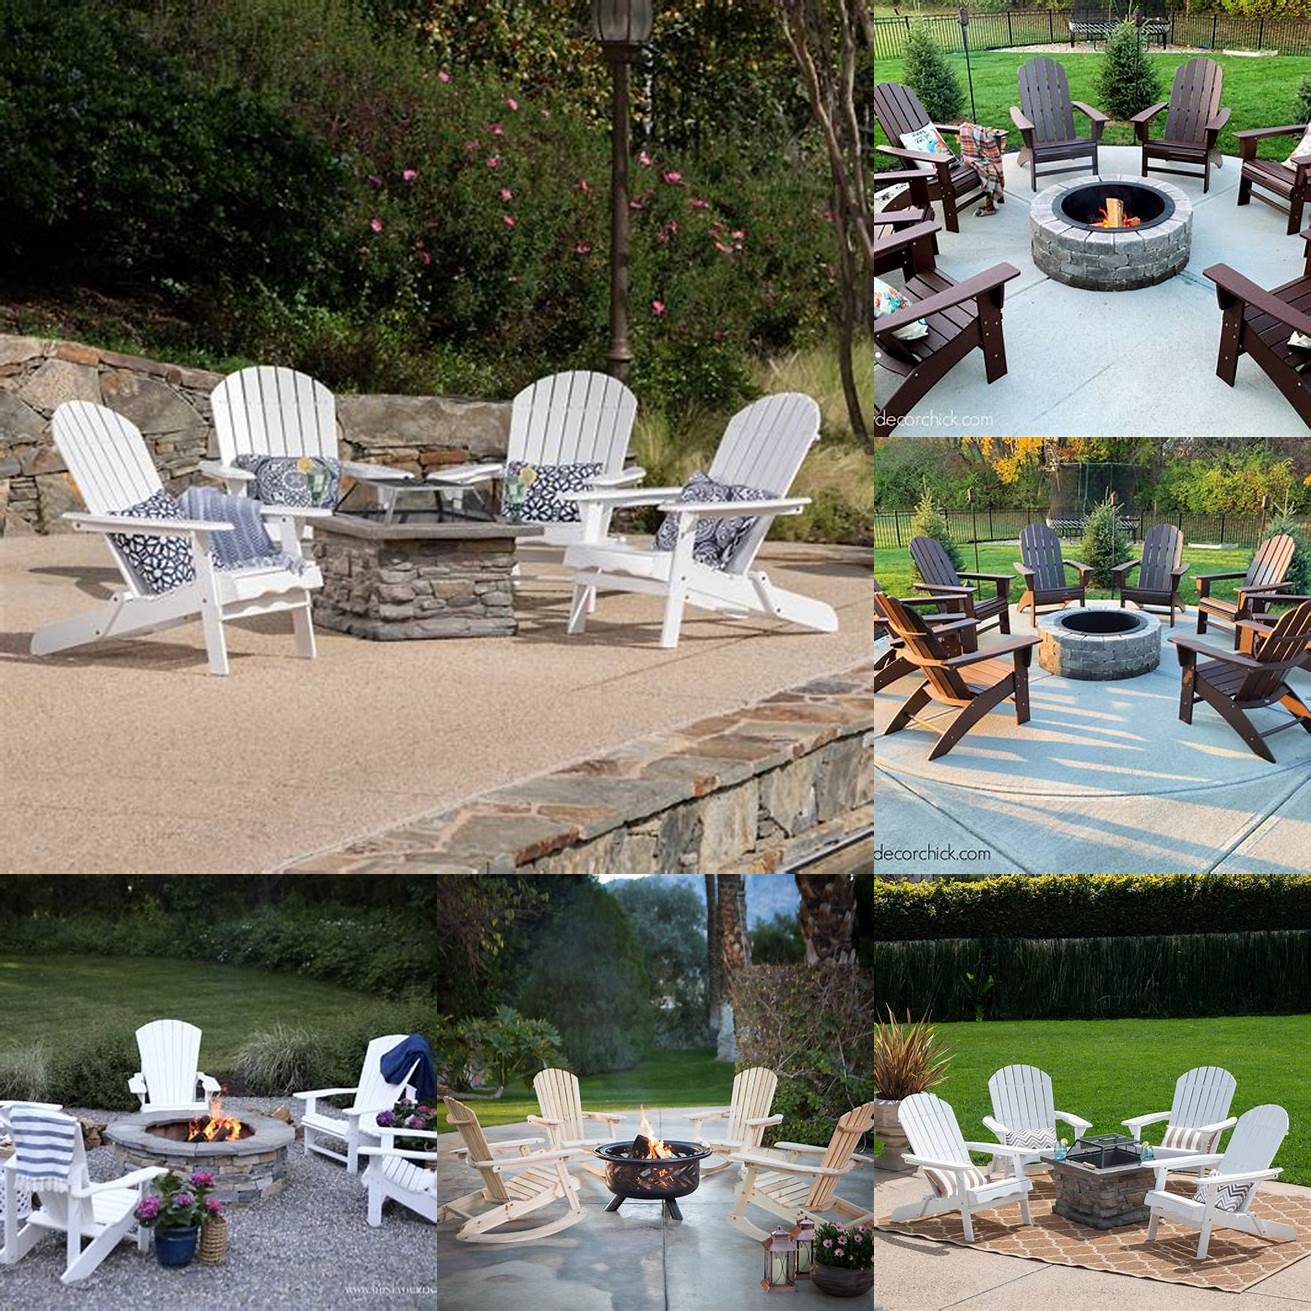 White Adirondack chairs arranged around a fire pit on a patio